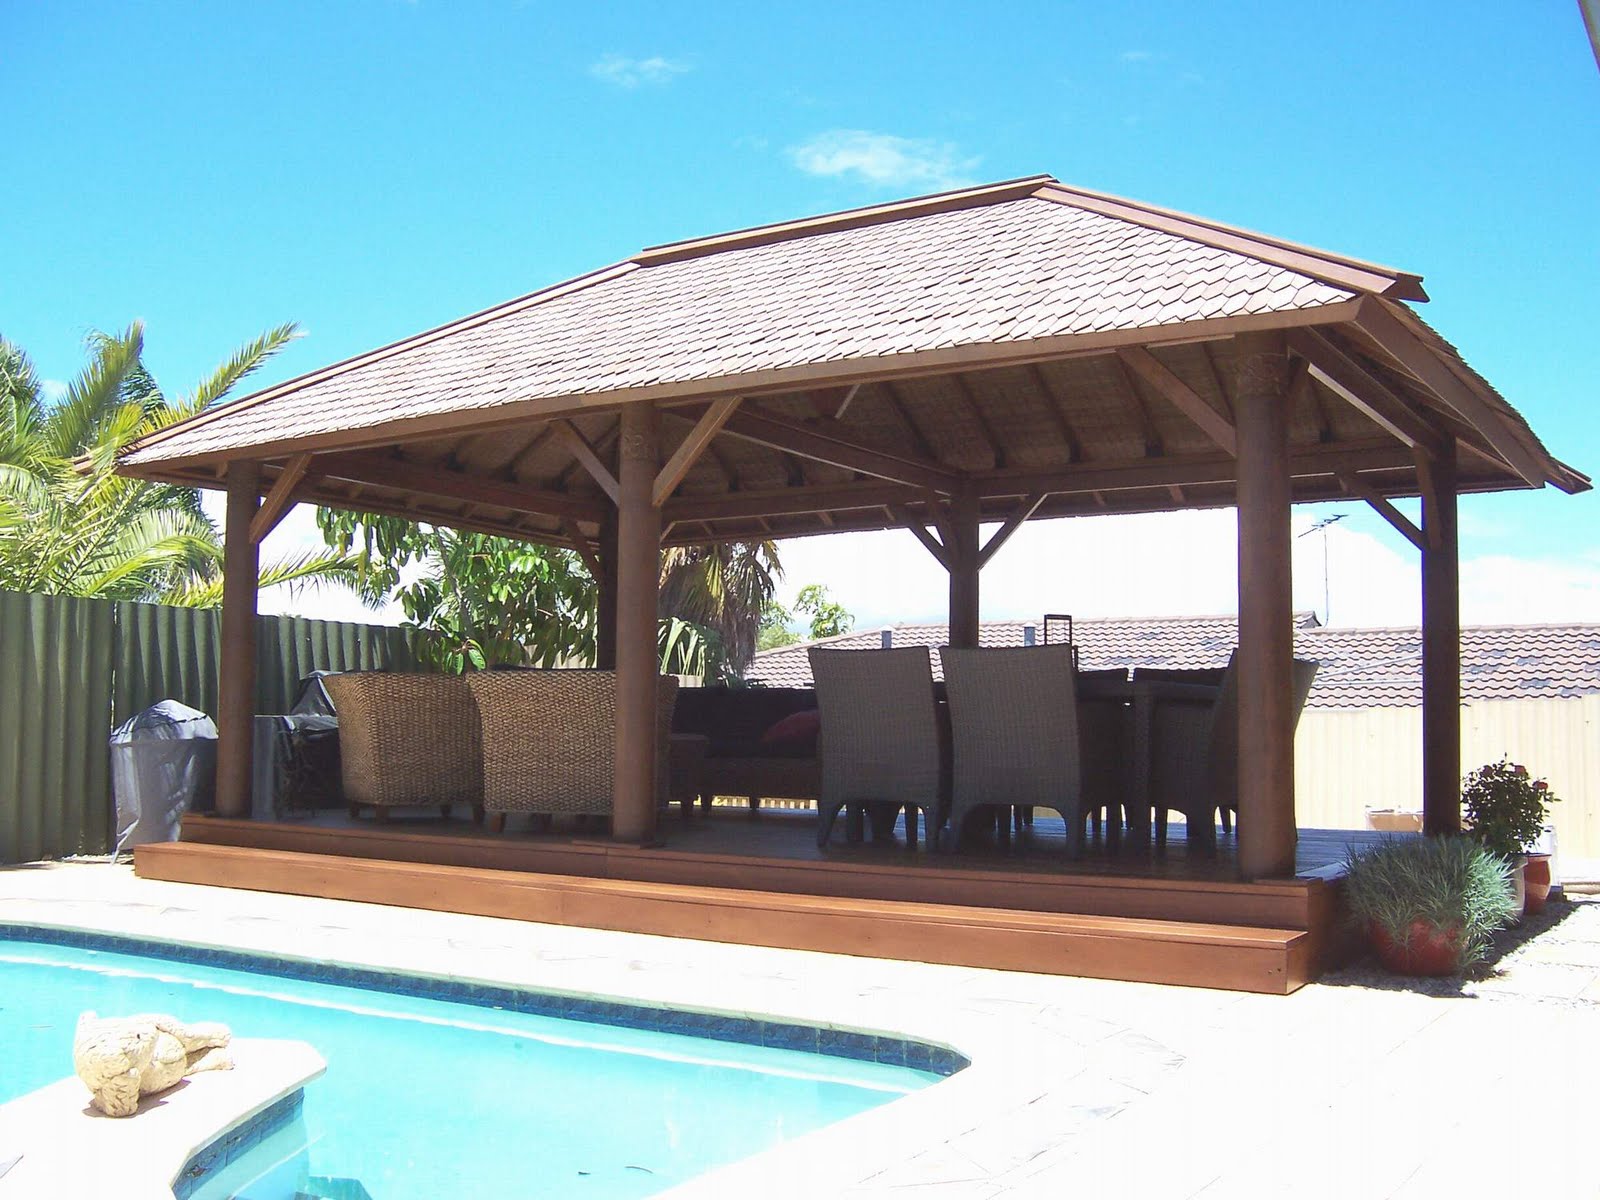  Gazebo  Wooden gazebos exclusively for our clients in 